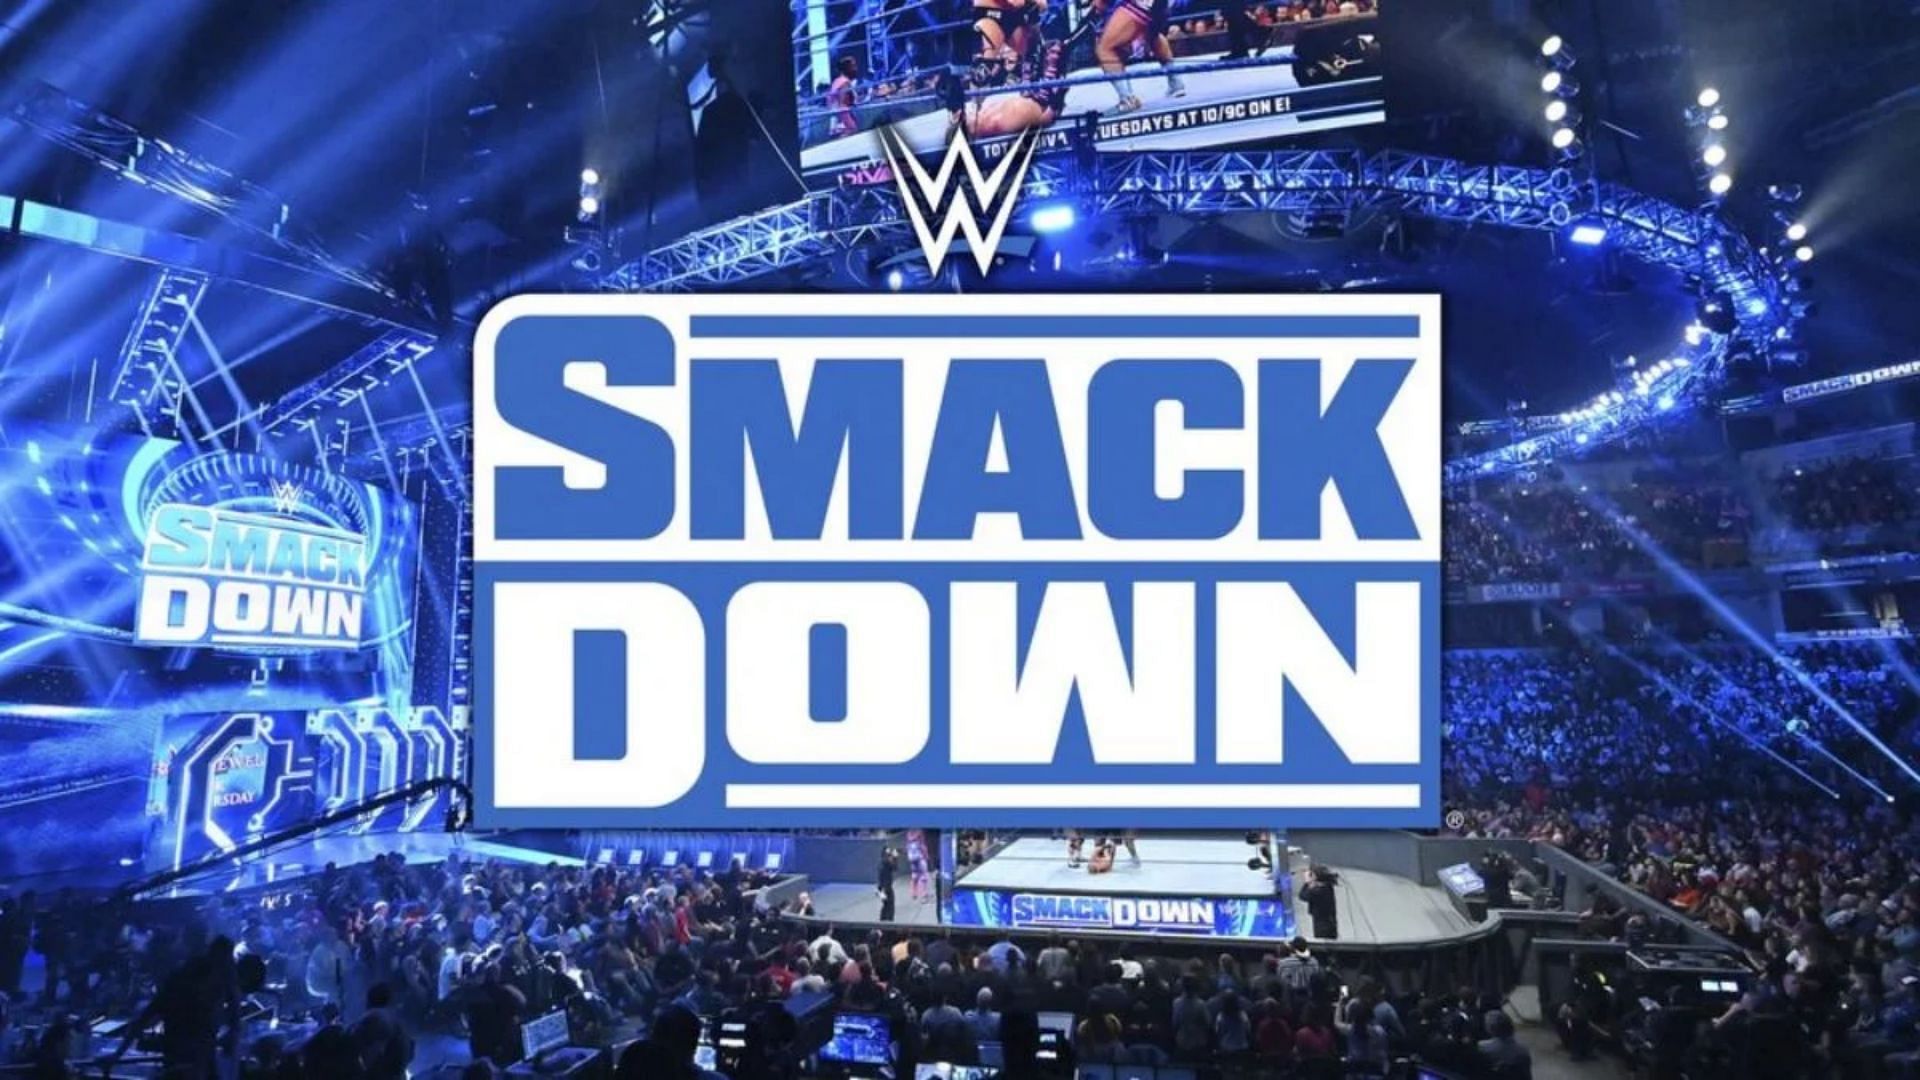 The WWE SmackDown star has become a rather important member of the WWE roster